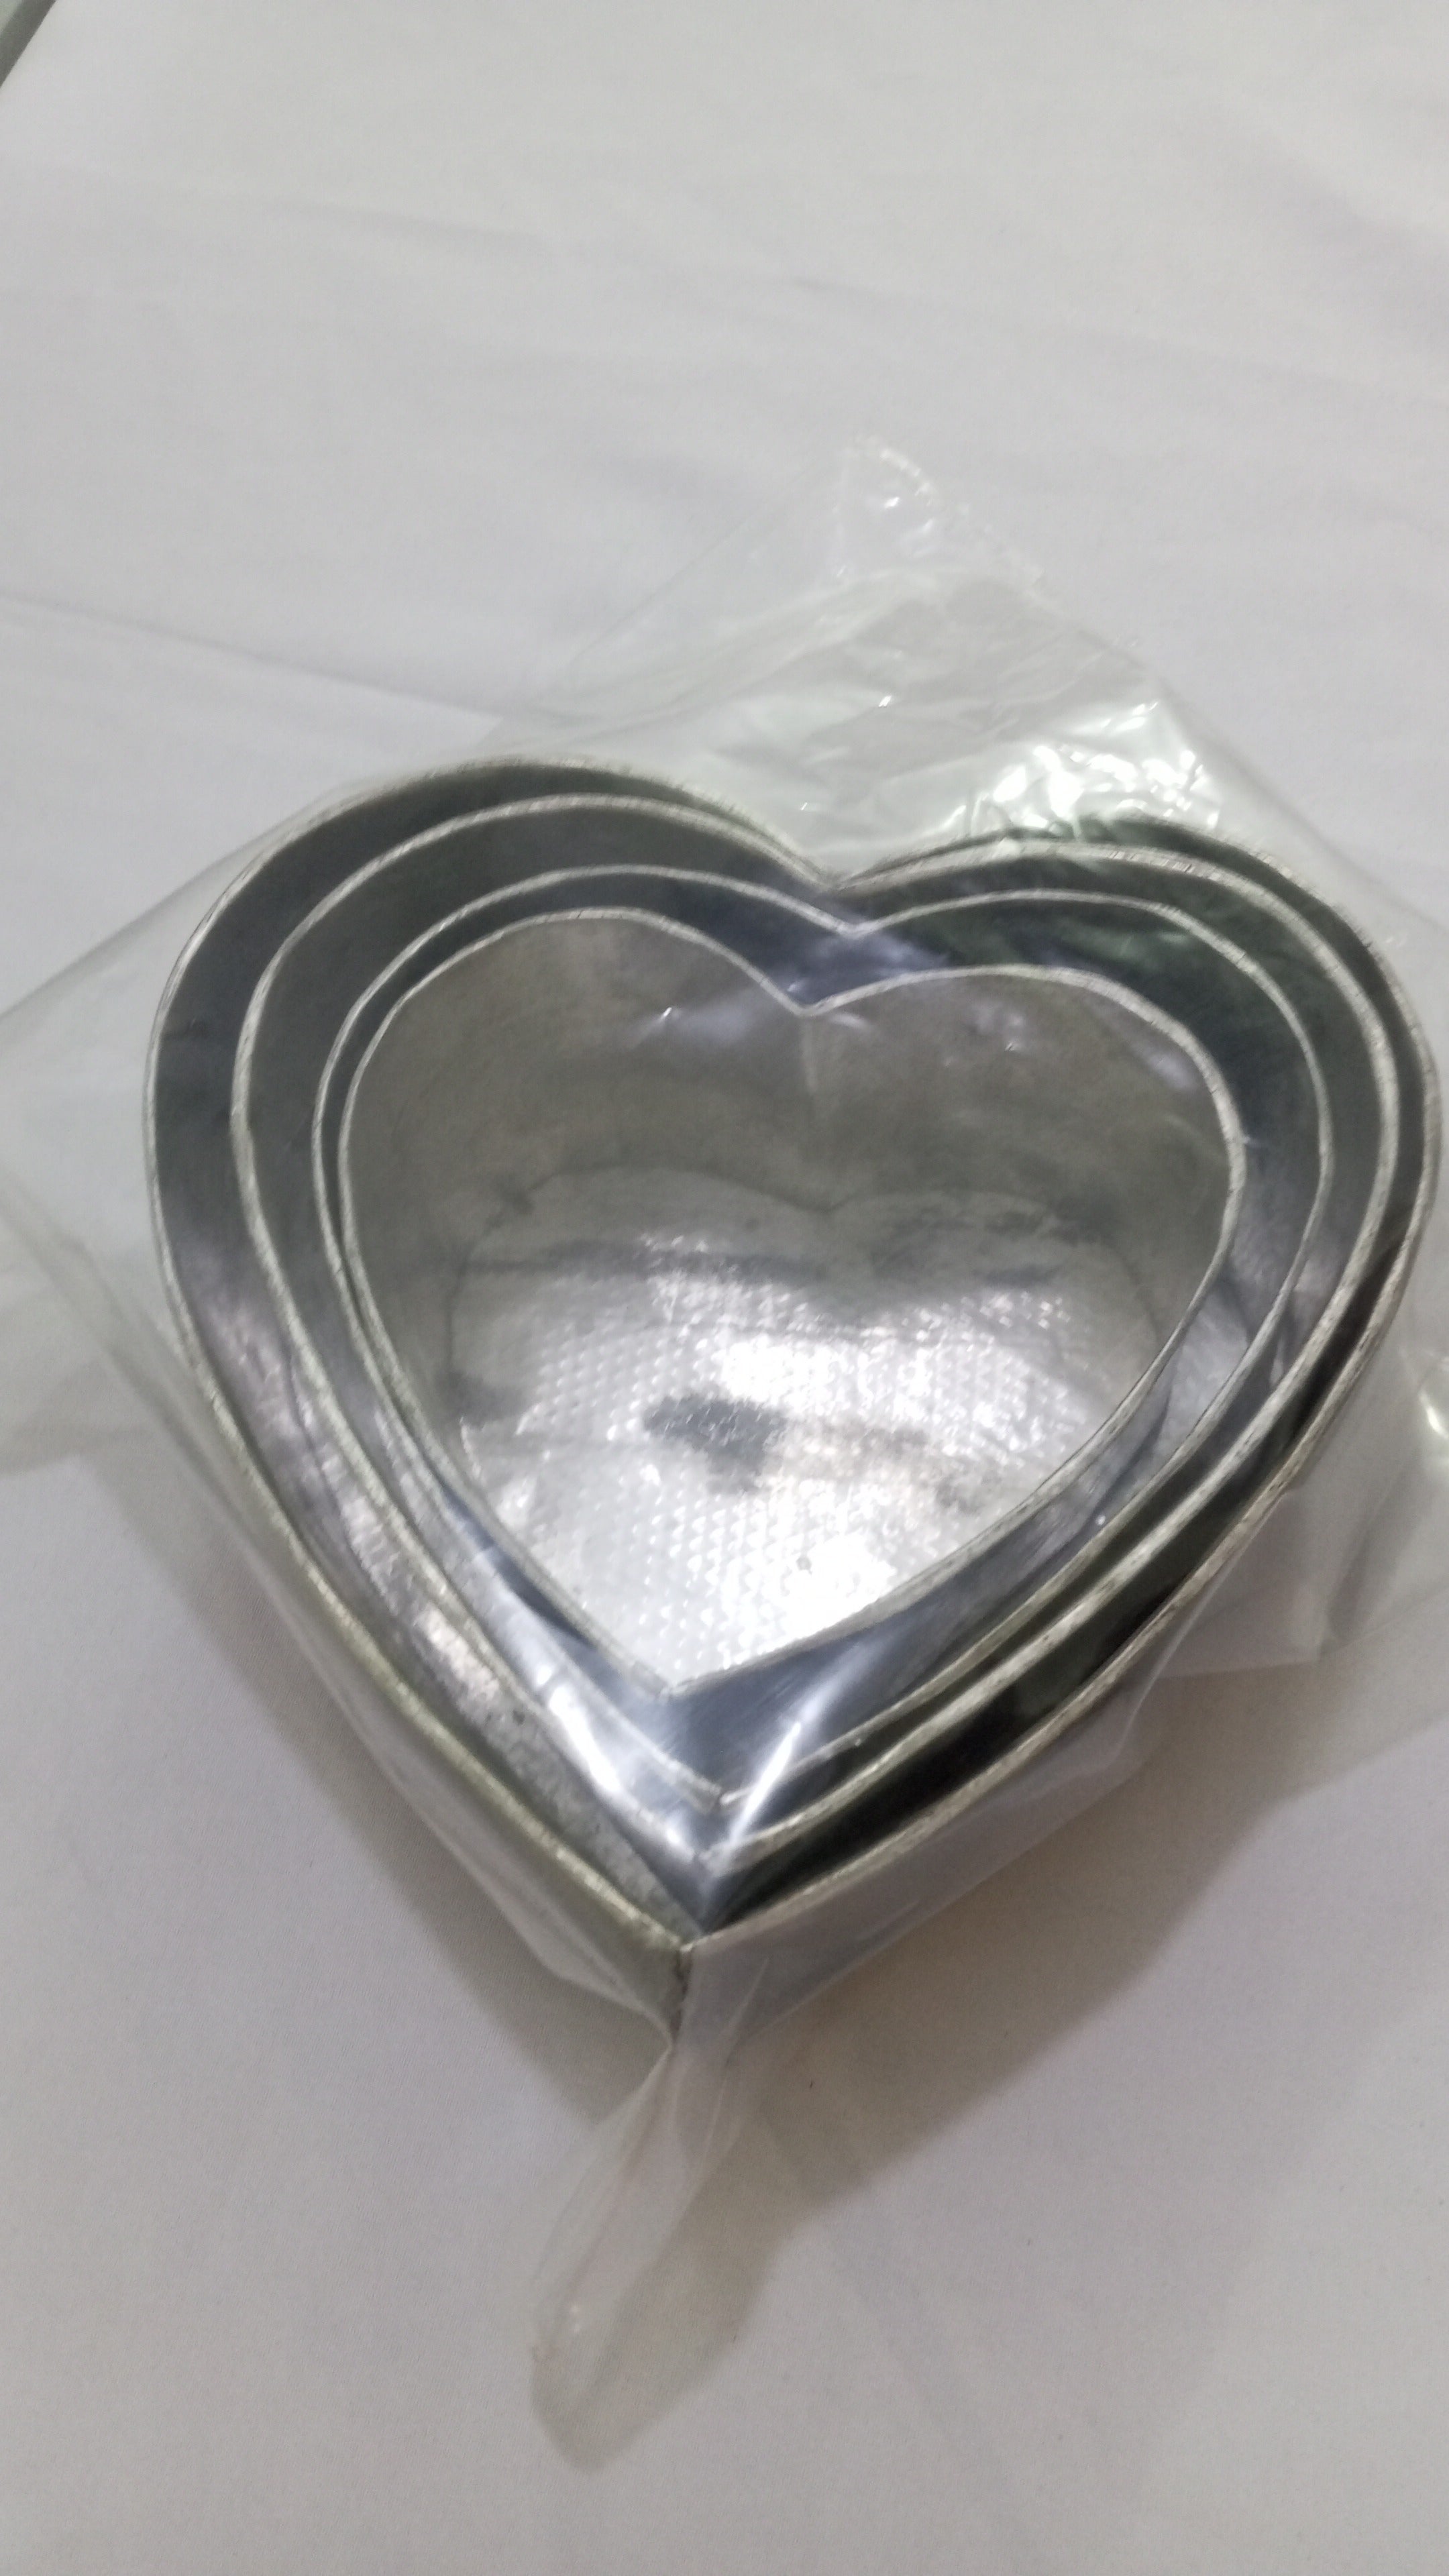 Variety Mixed Size 4in1 Set of Heart Shape Pan for Baking | JLV2b